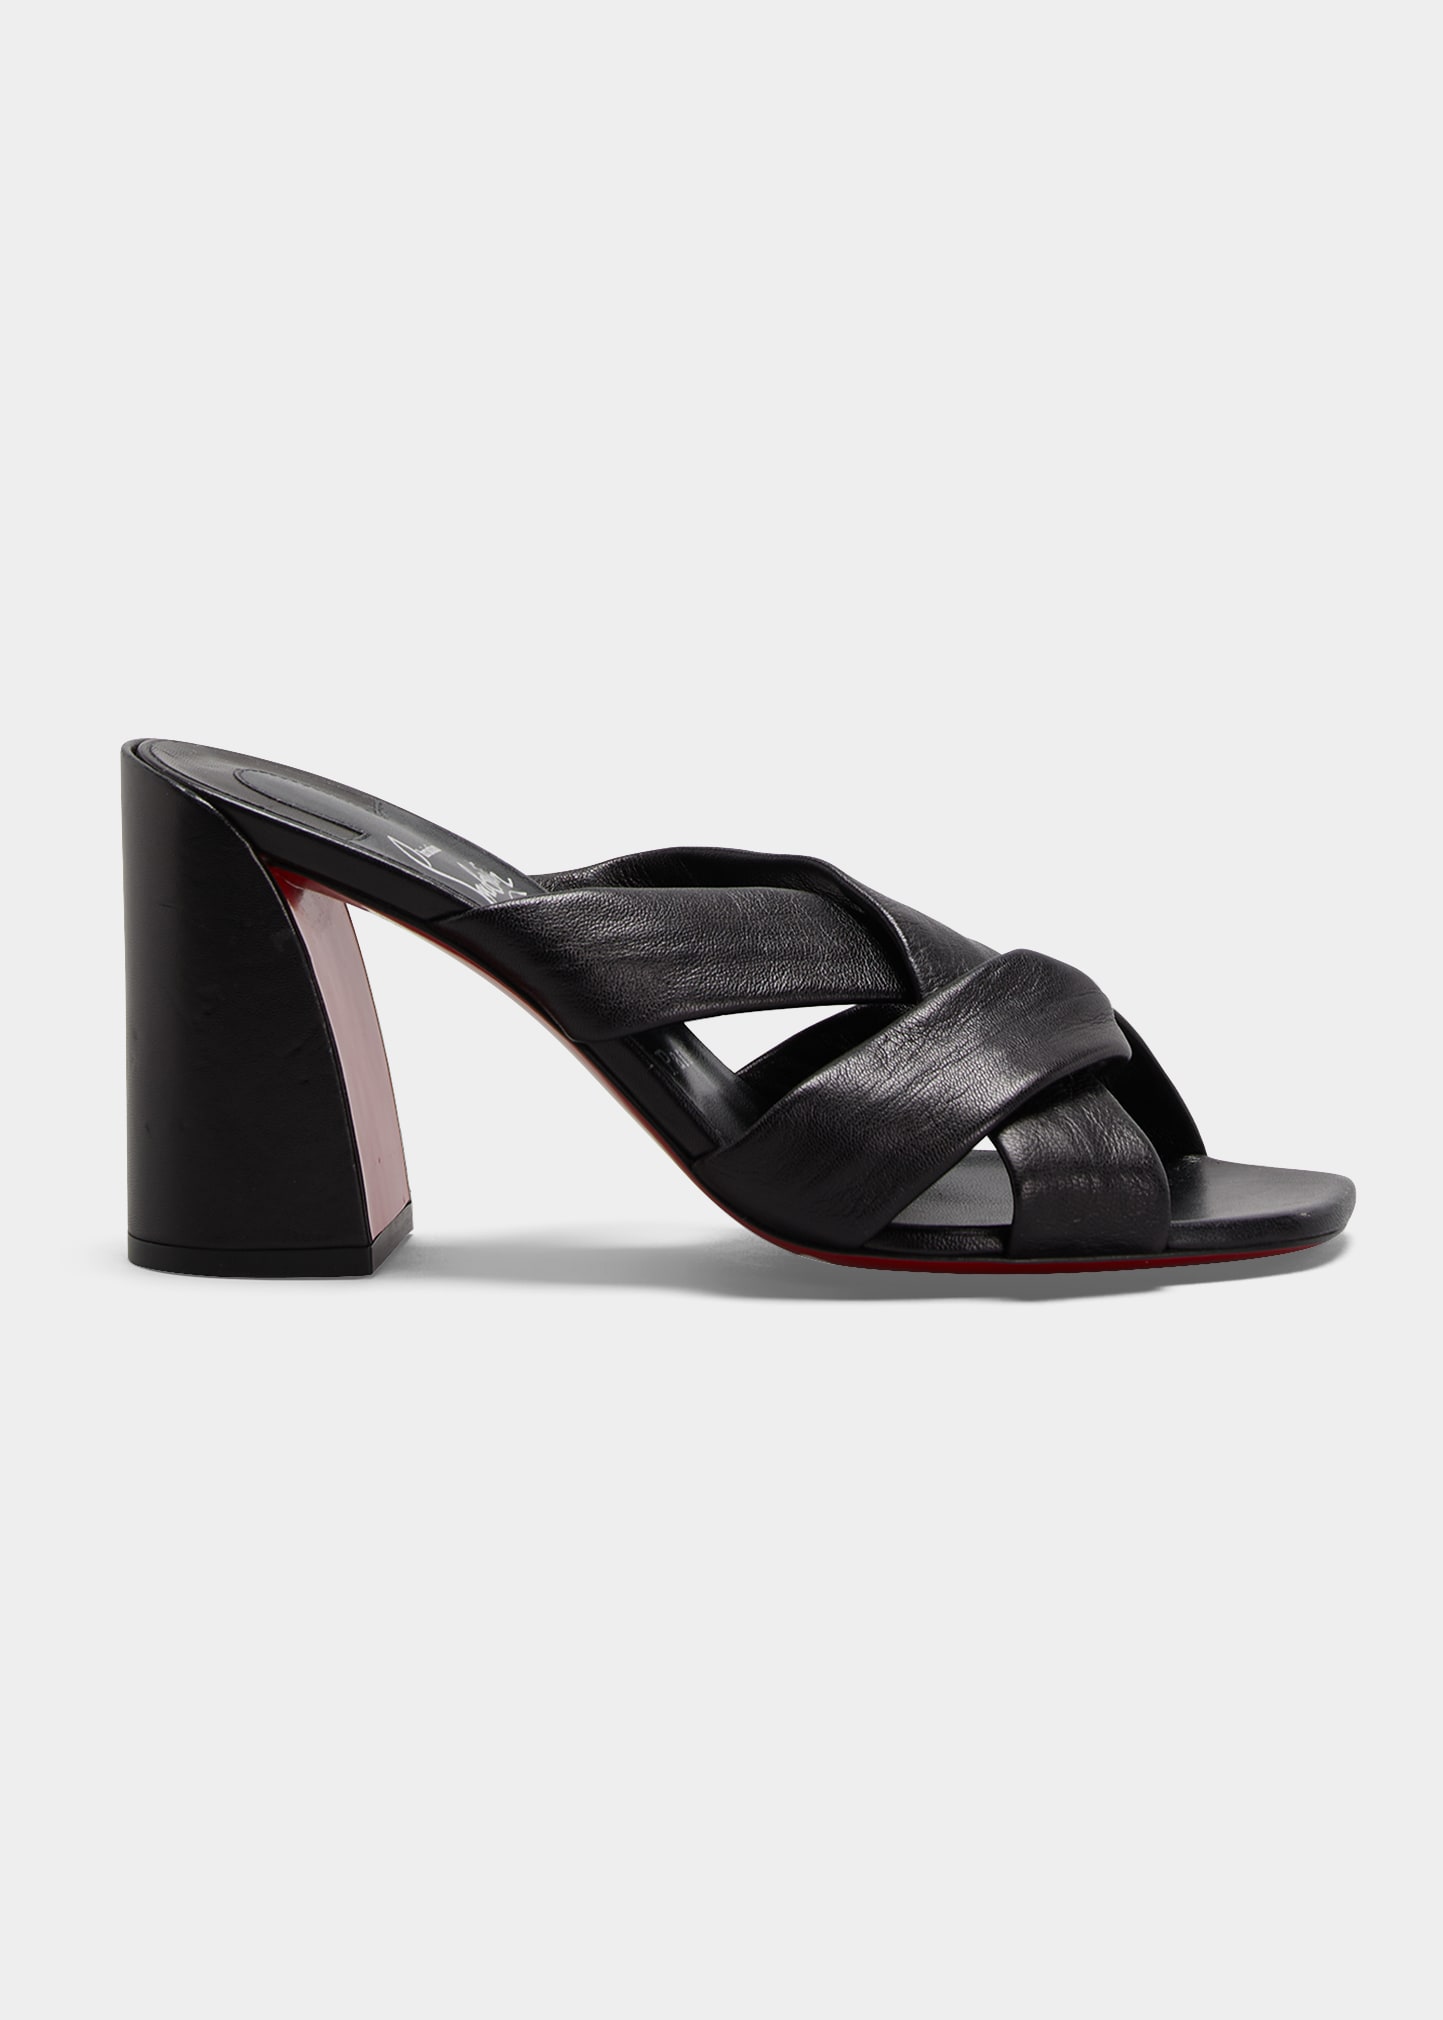 Christian Louboutin Dispo Club 85mm Red Sole Sandals In Black